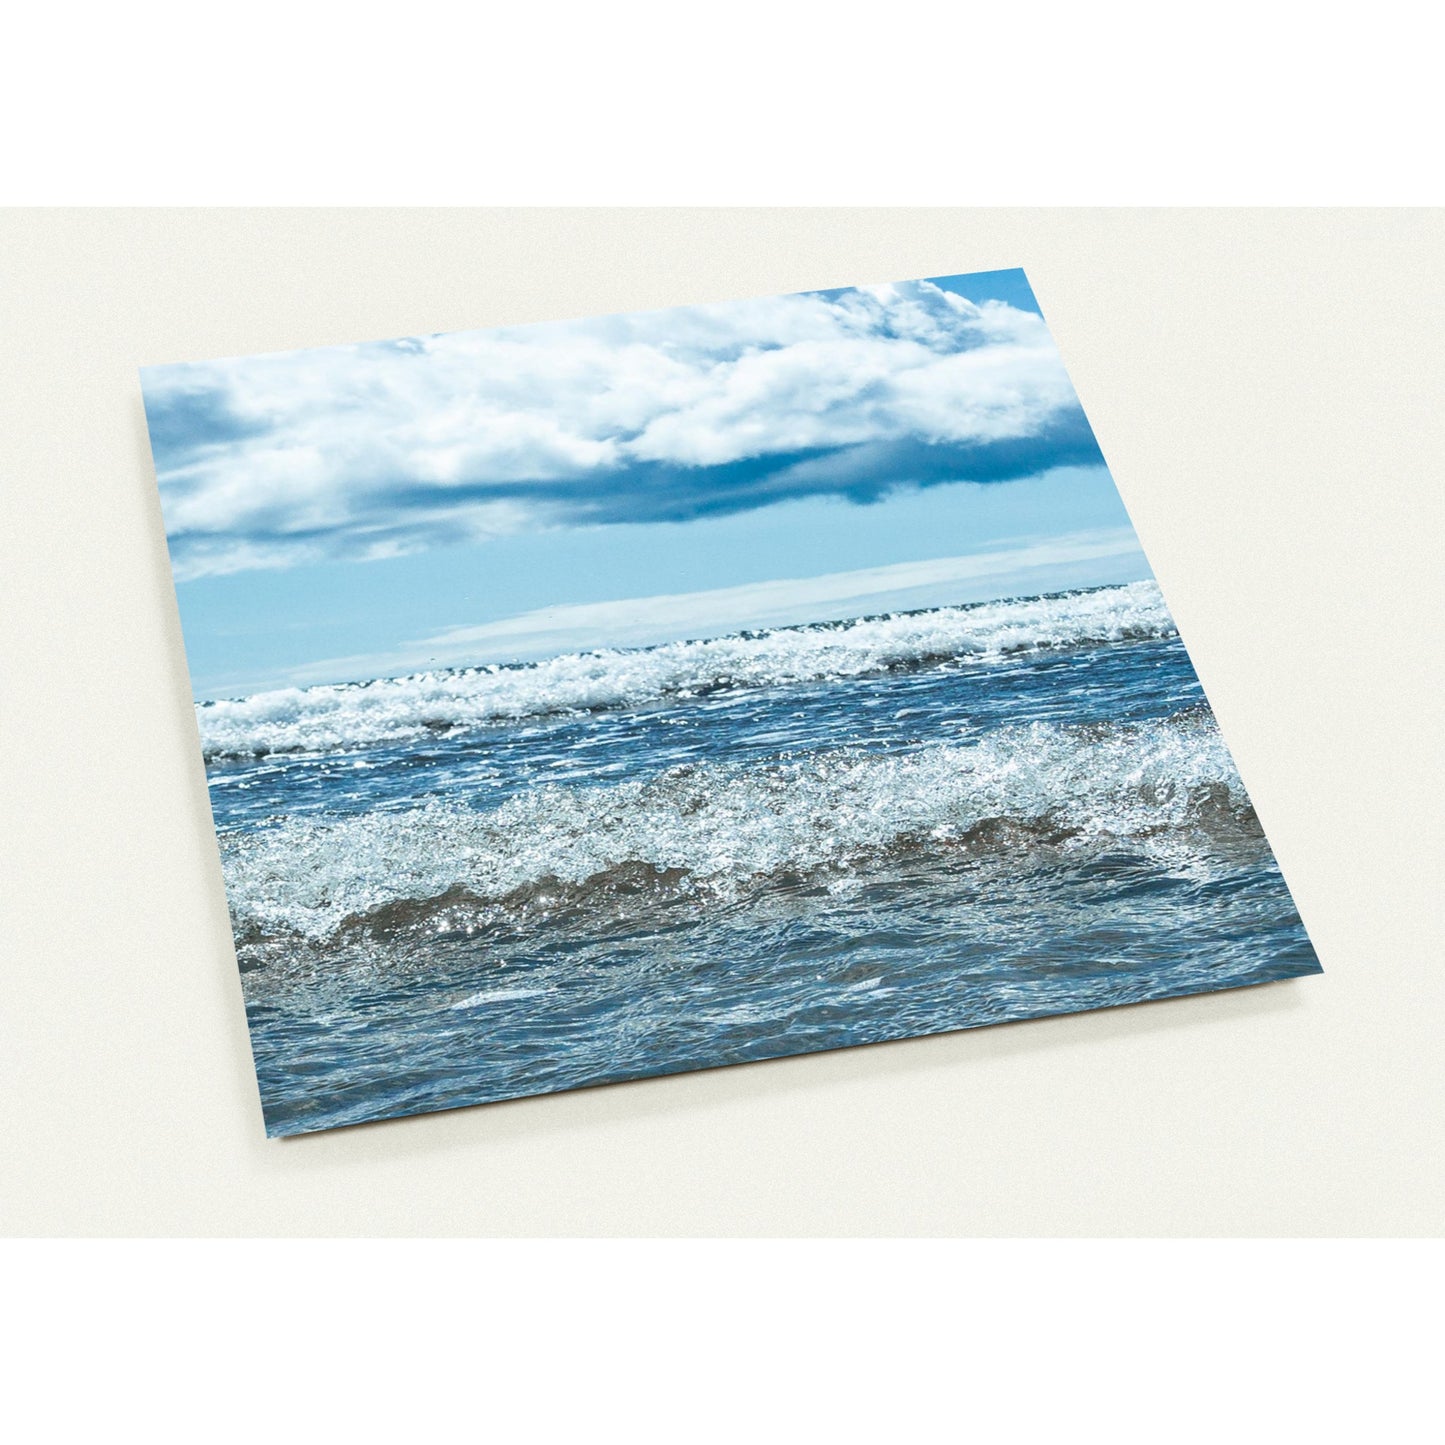 Sea Sounds Greeting Card Set with 10 Cards (2-Sided, with Envelopes)